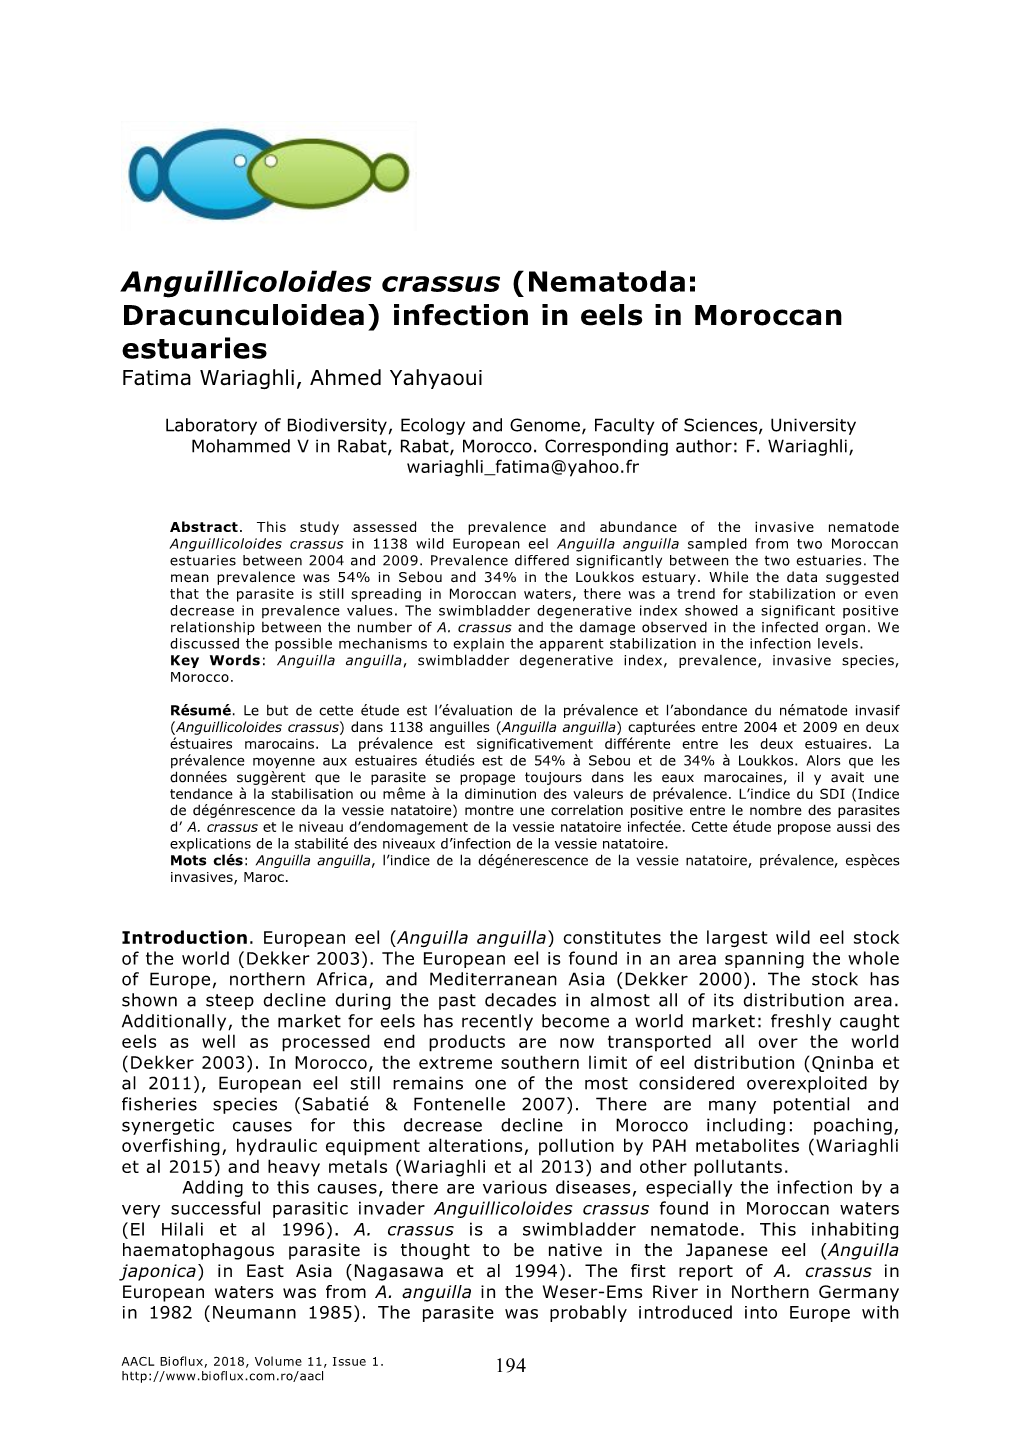 Anguillicoloides Crassus (Nematoda: Dracunculoidea) Infection in Eels in Moroccan Estuaries Fatima Wariaghli, Ahmed Yahyaoui